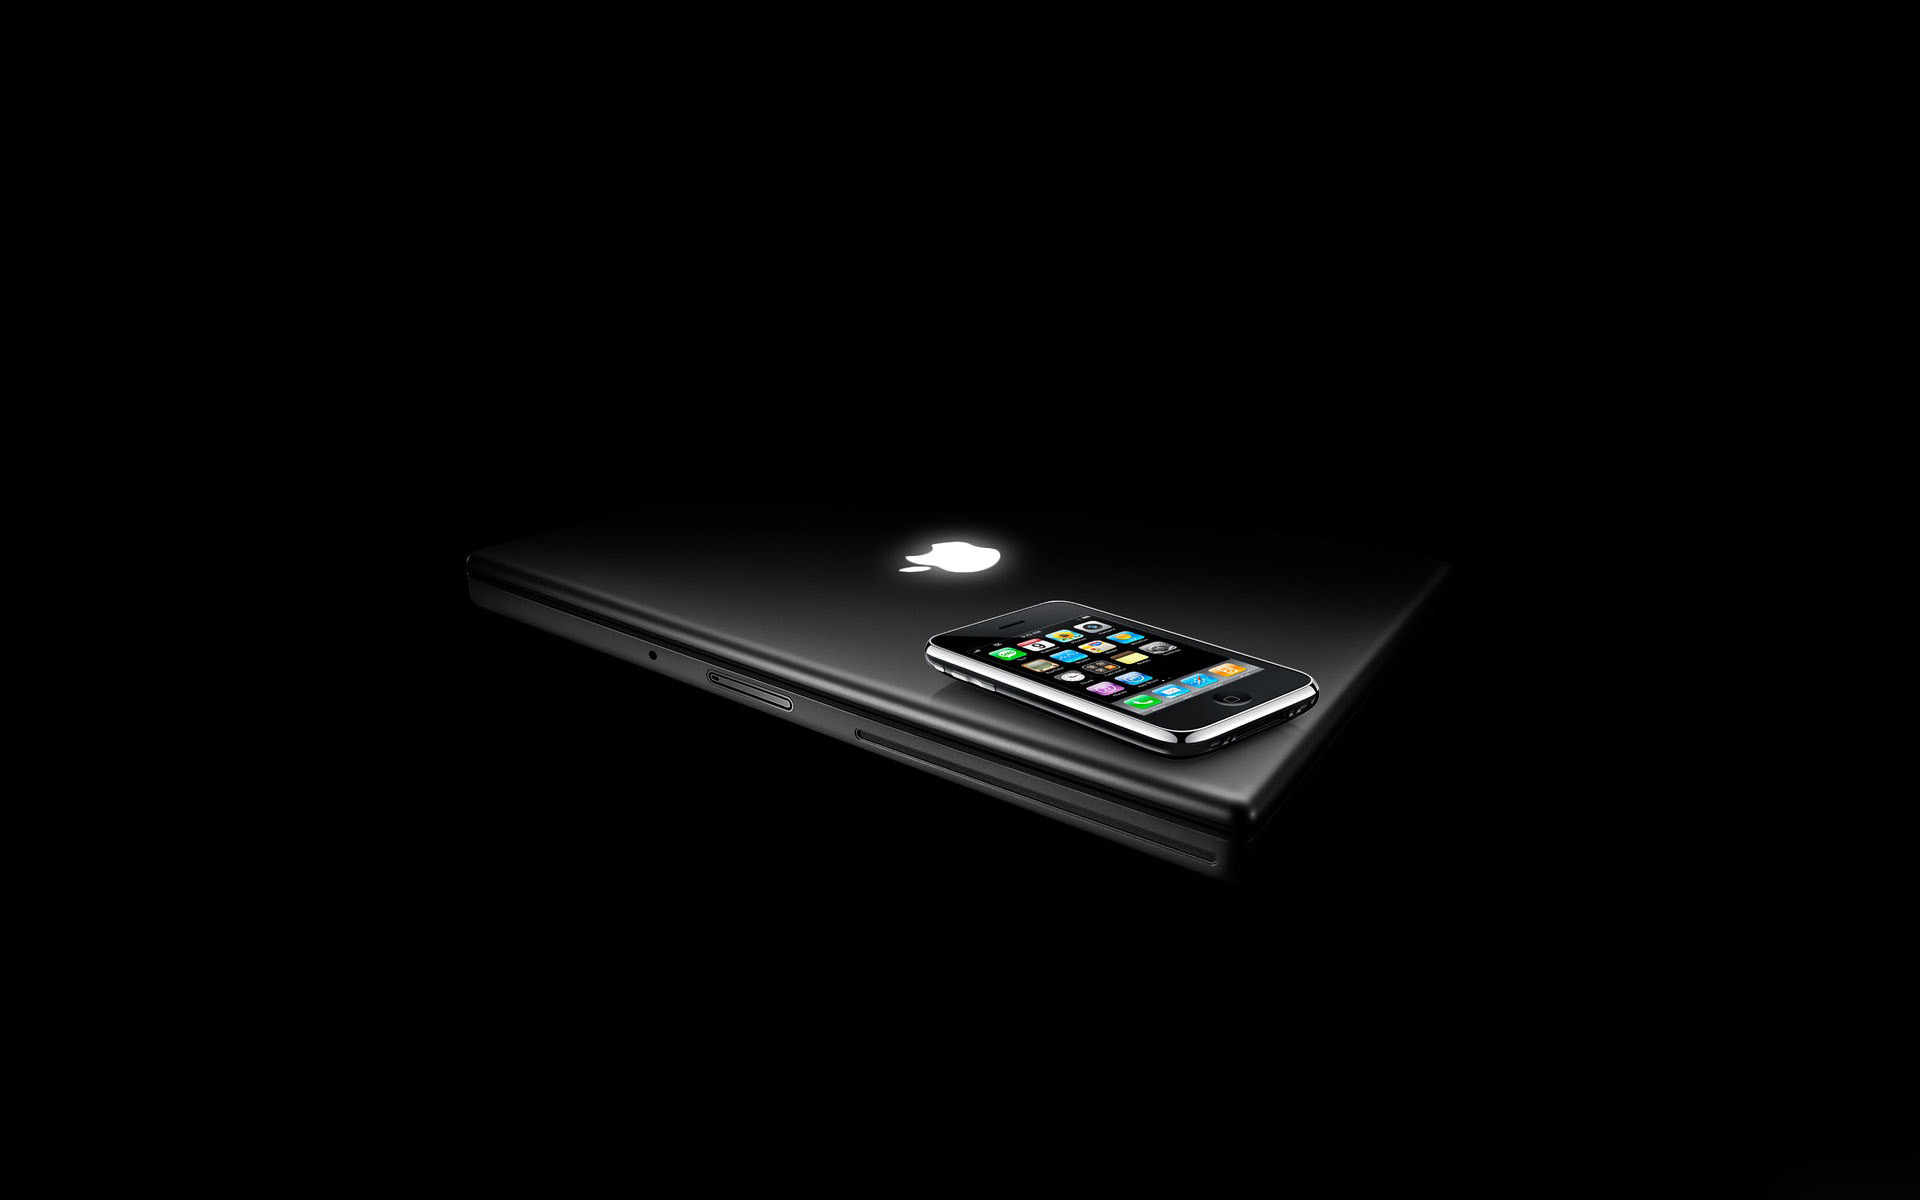  MacBook Pro all connections hd wallpaper High Definition Wallpaper